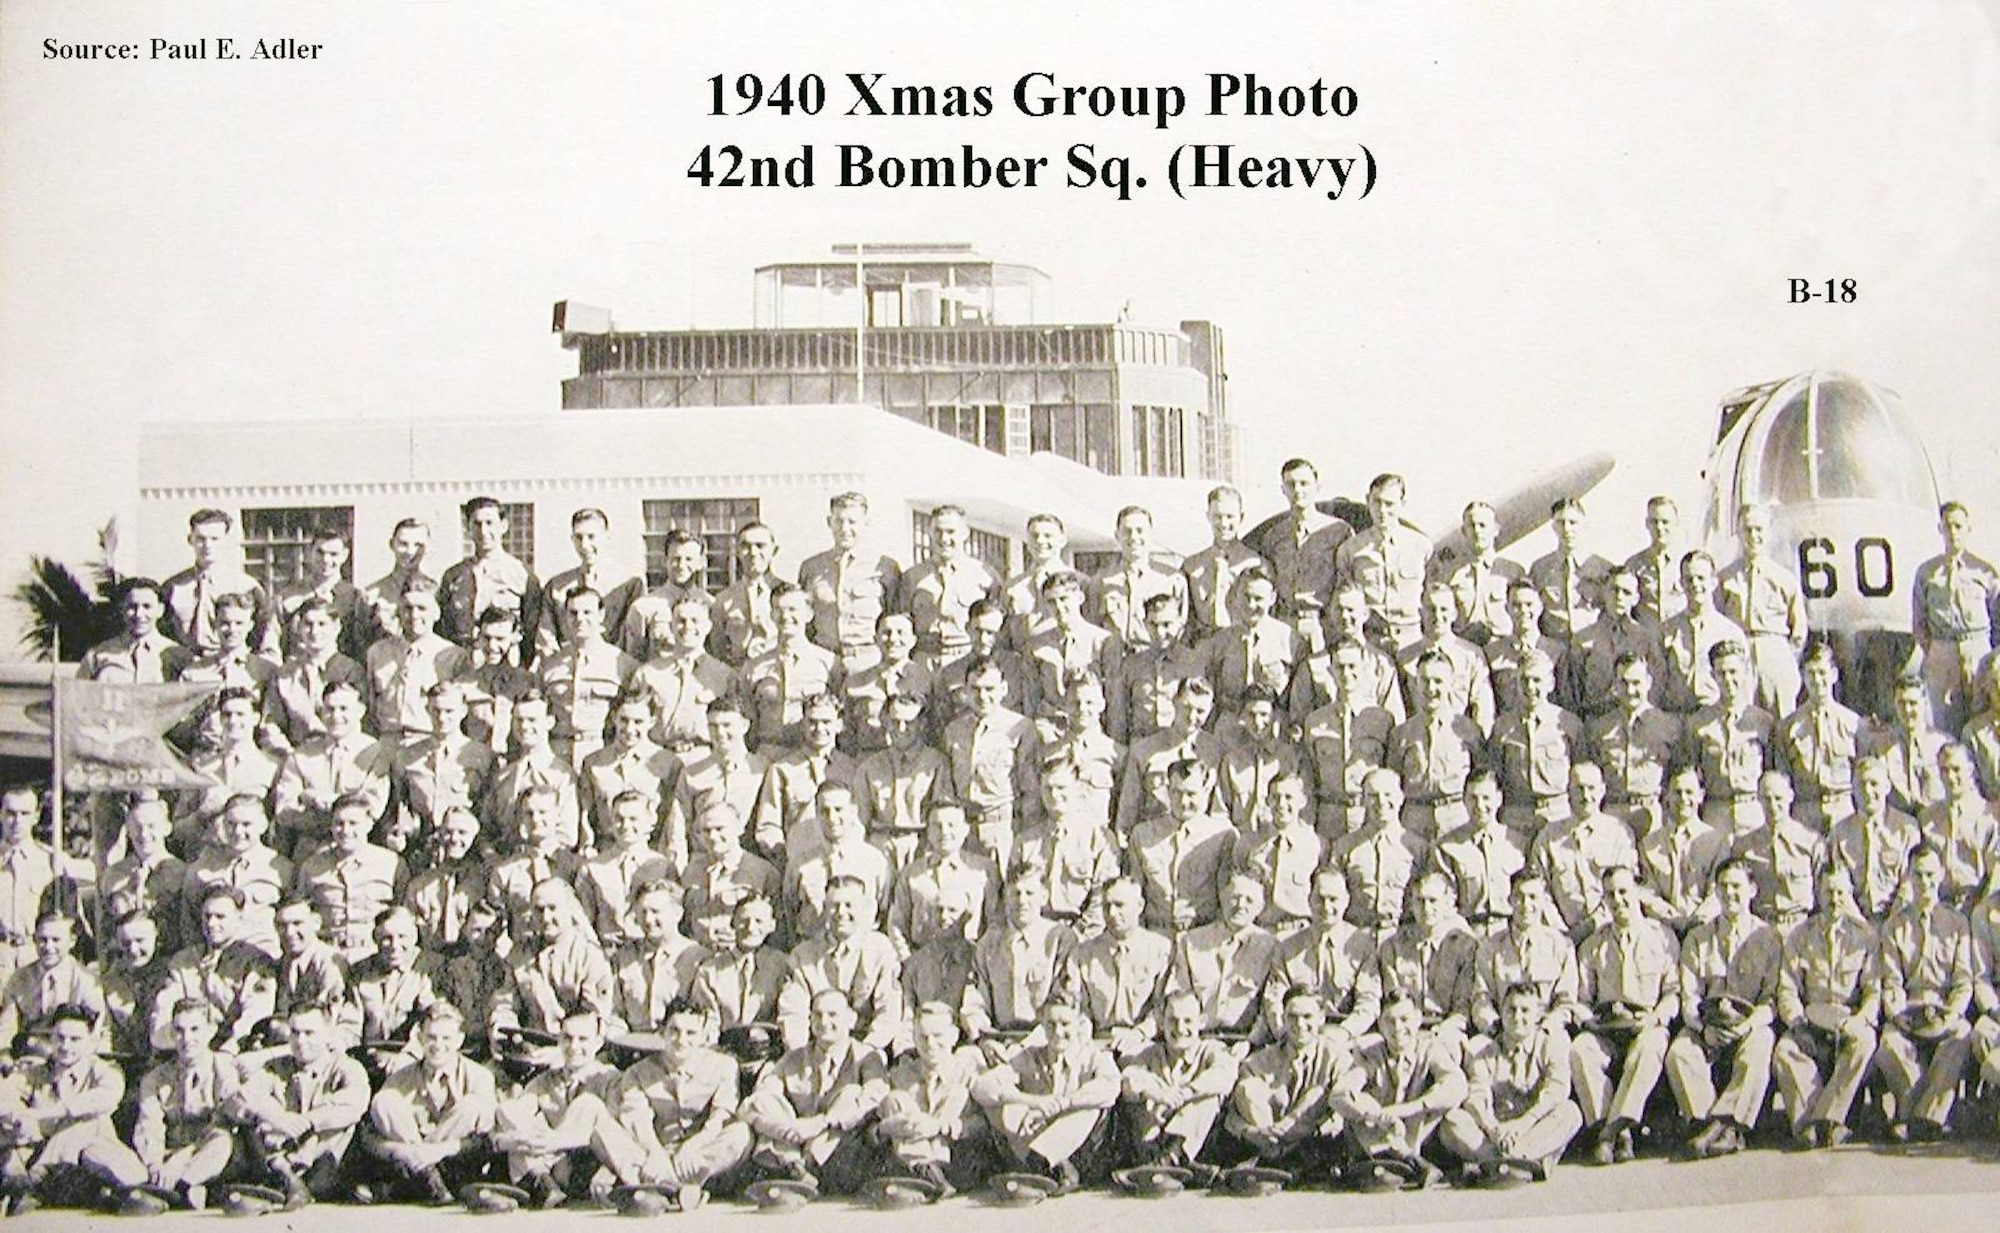 Vintage  group photo of the 42nd Bomber Squadron on Christmas Day in 1940.